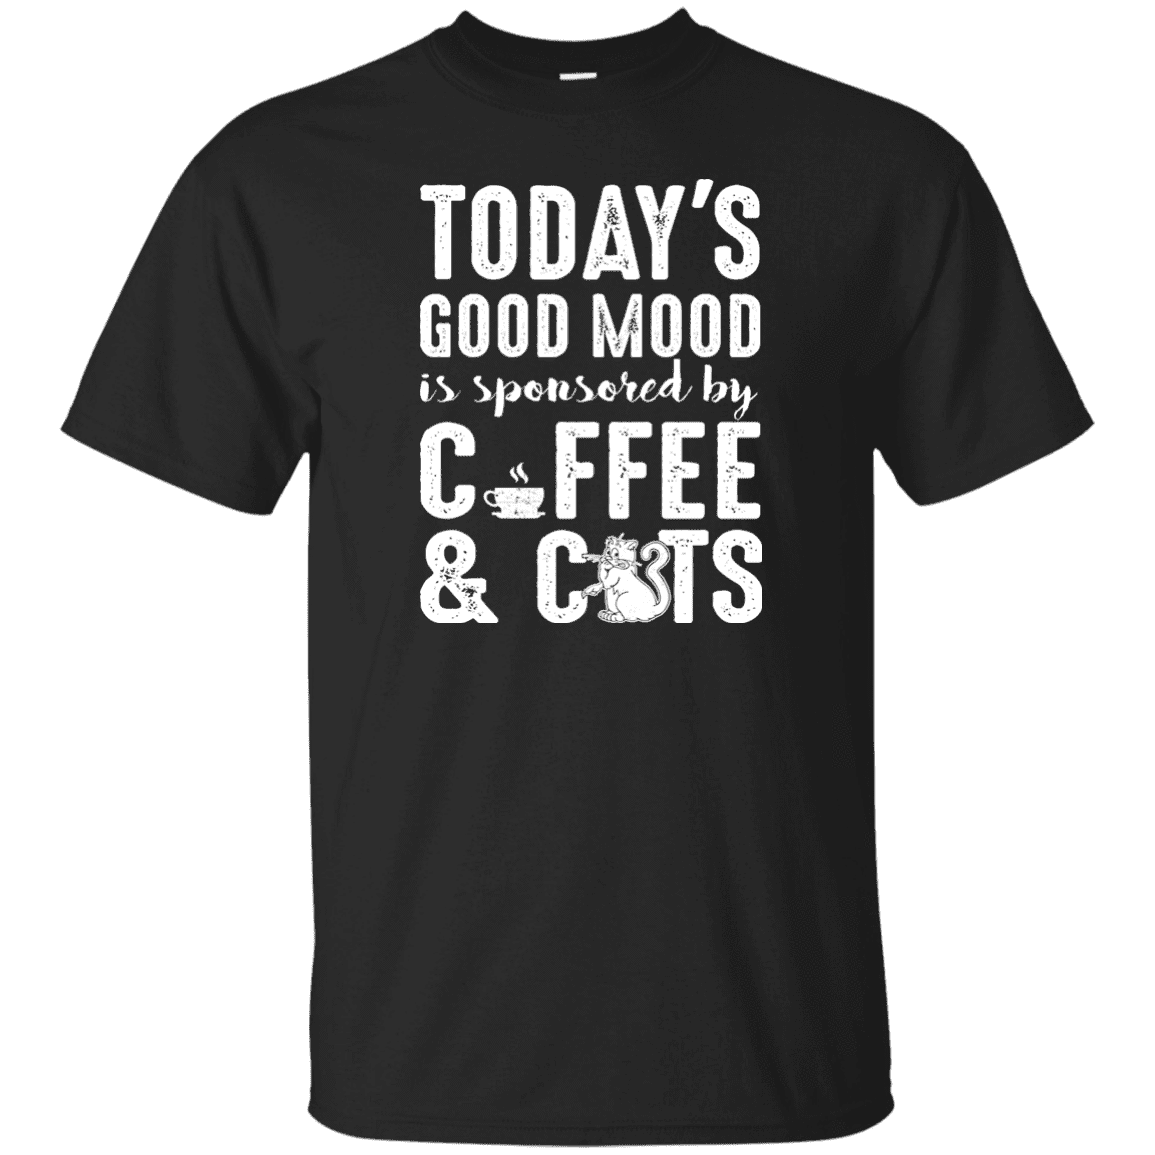 Today's Good Mood Coffee & Cats - T Shirt.